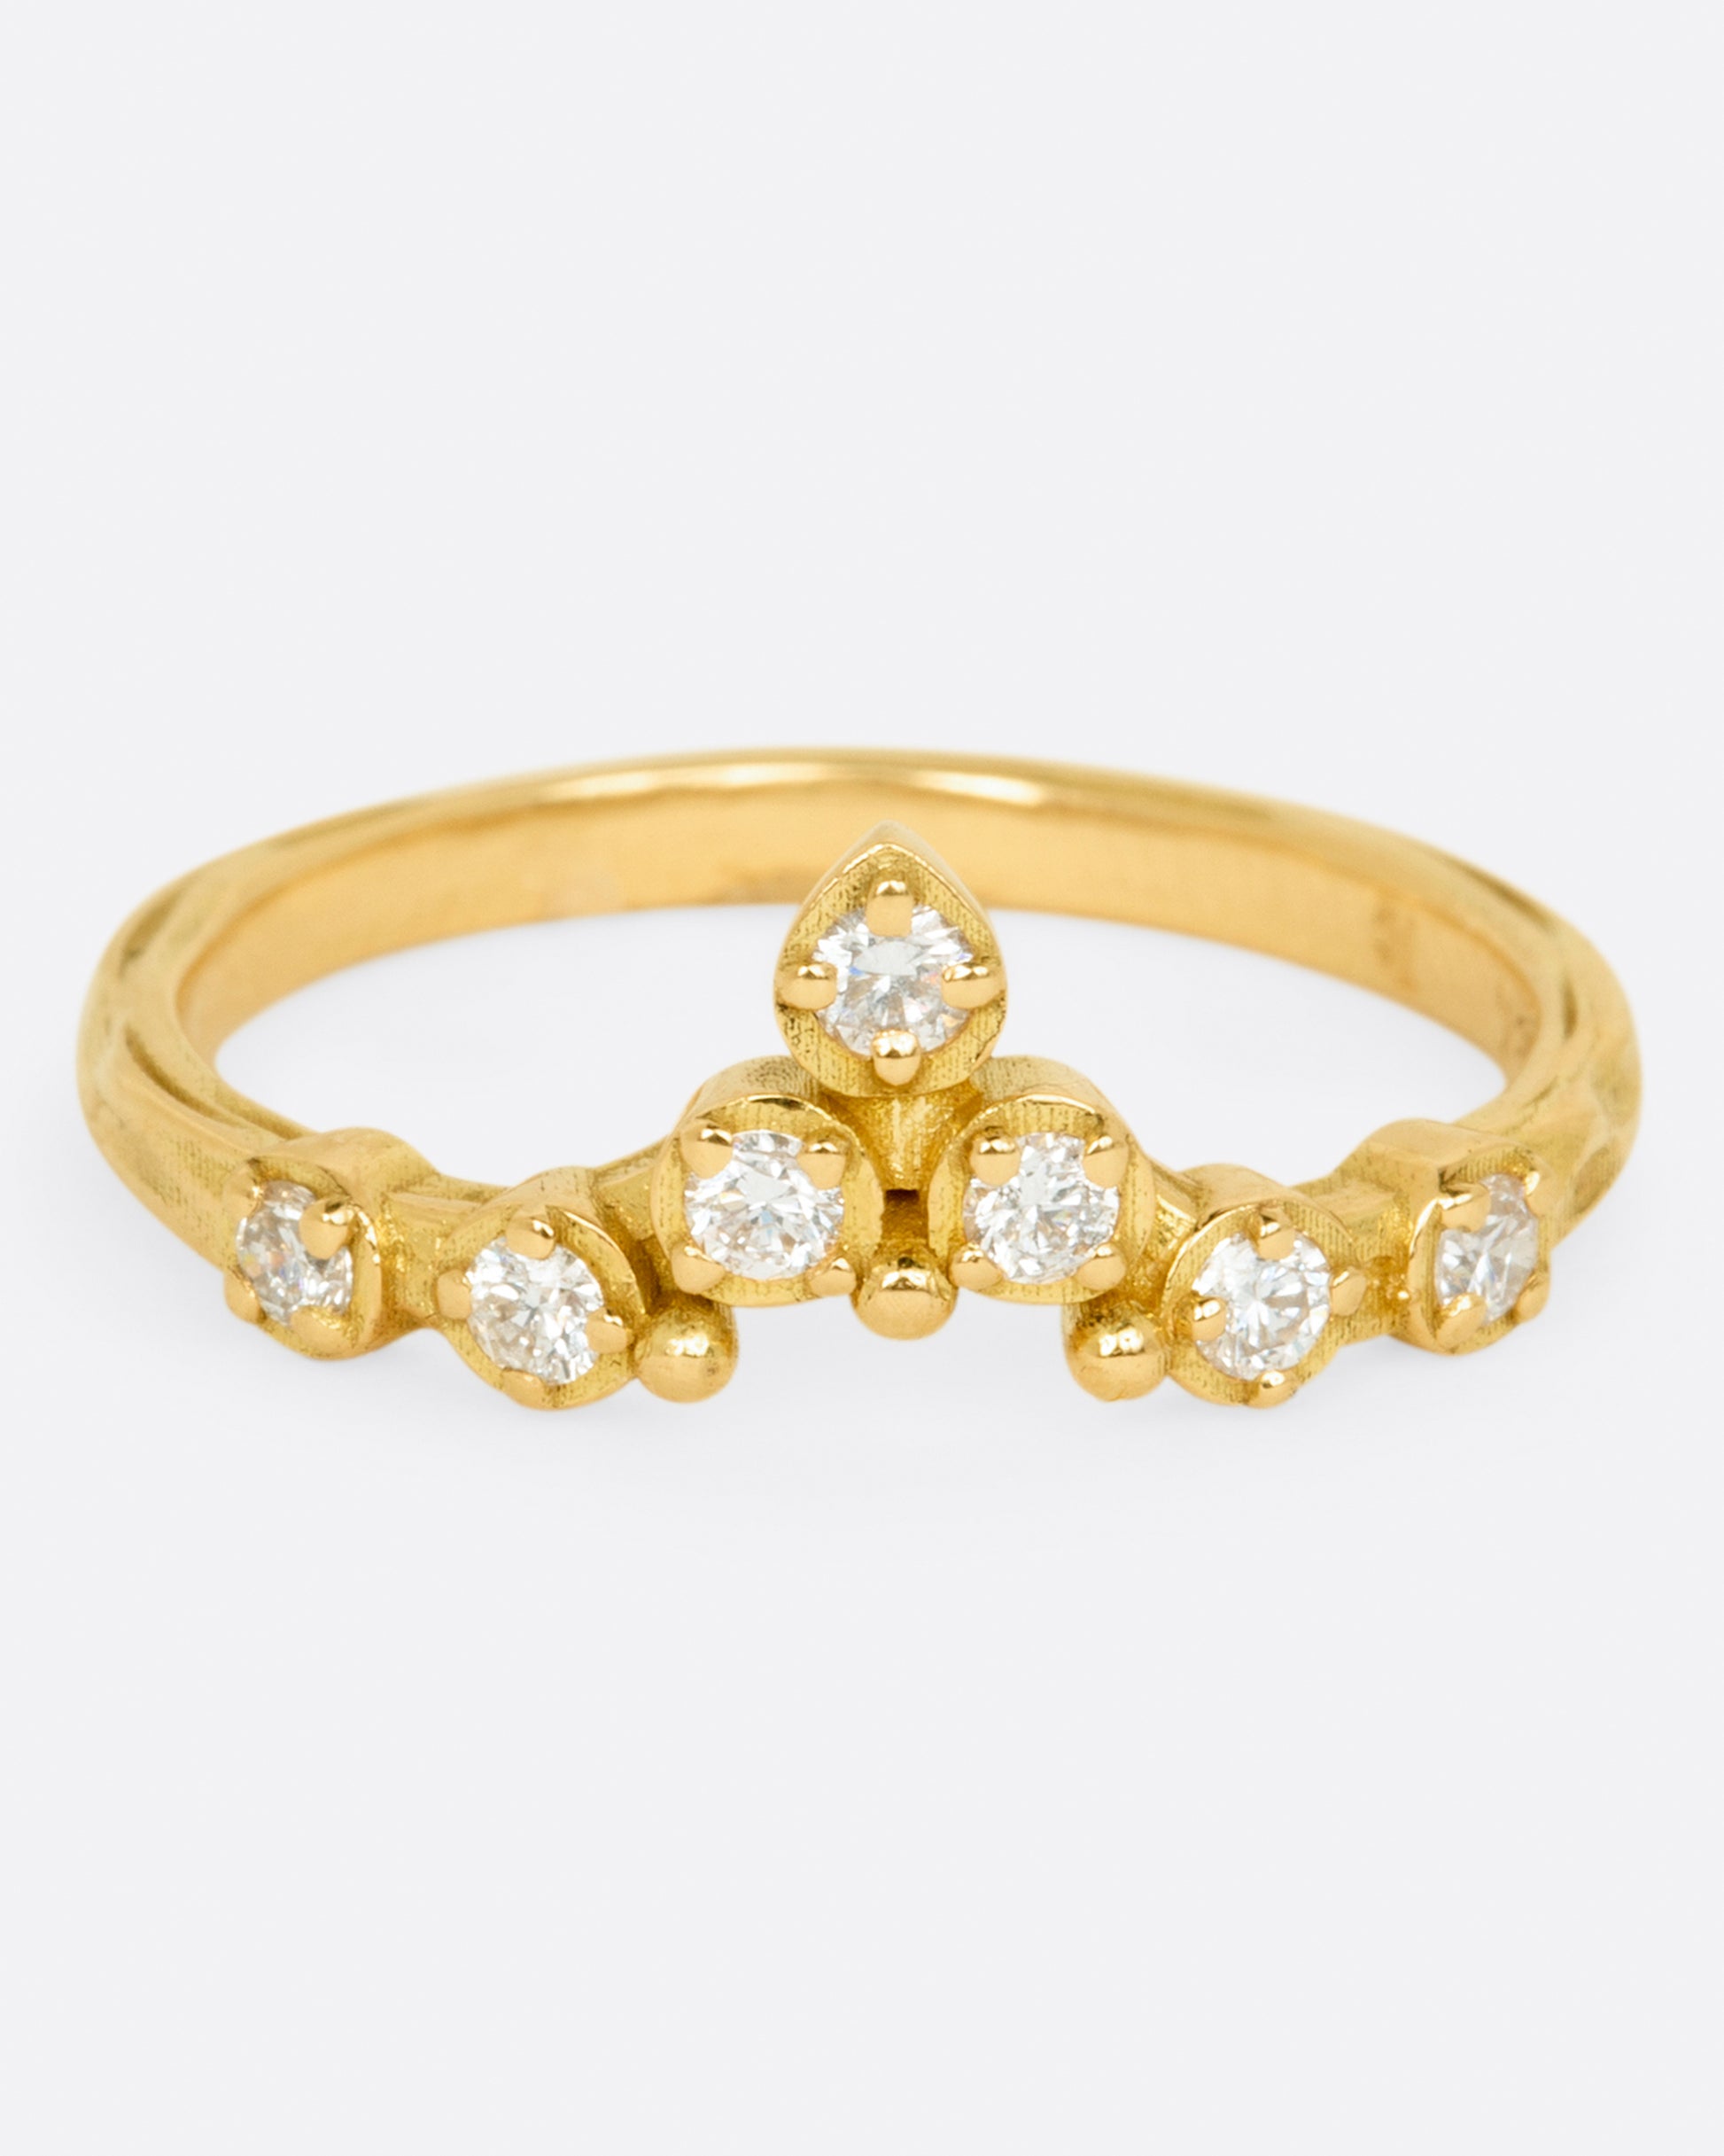 A slightly curved and pointed ring with seven diamonds on a textured band.